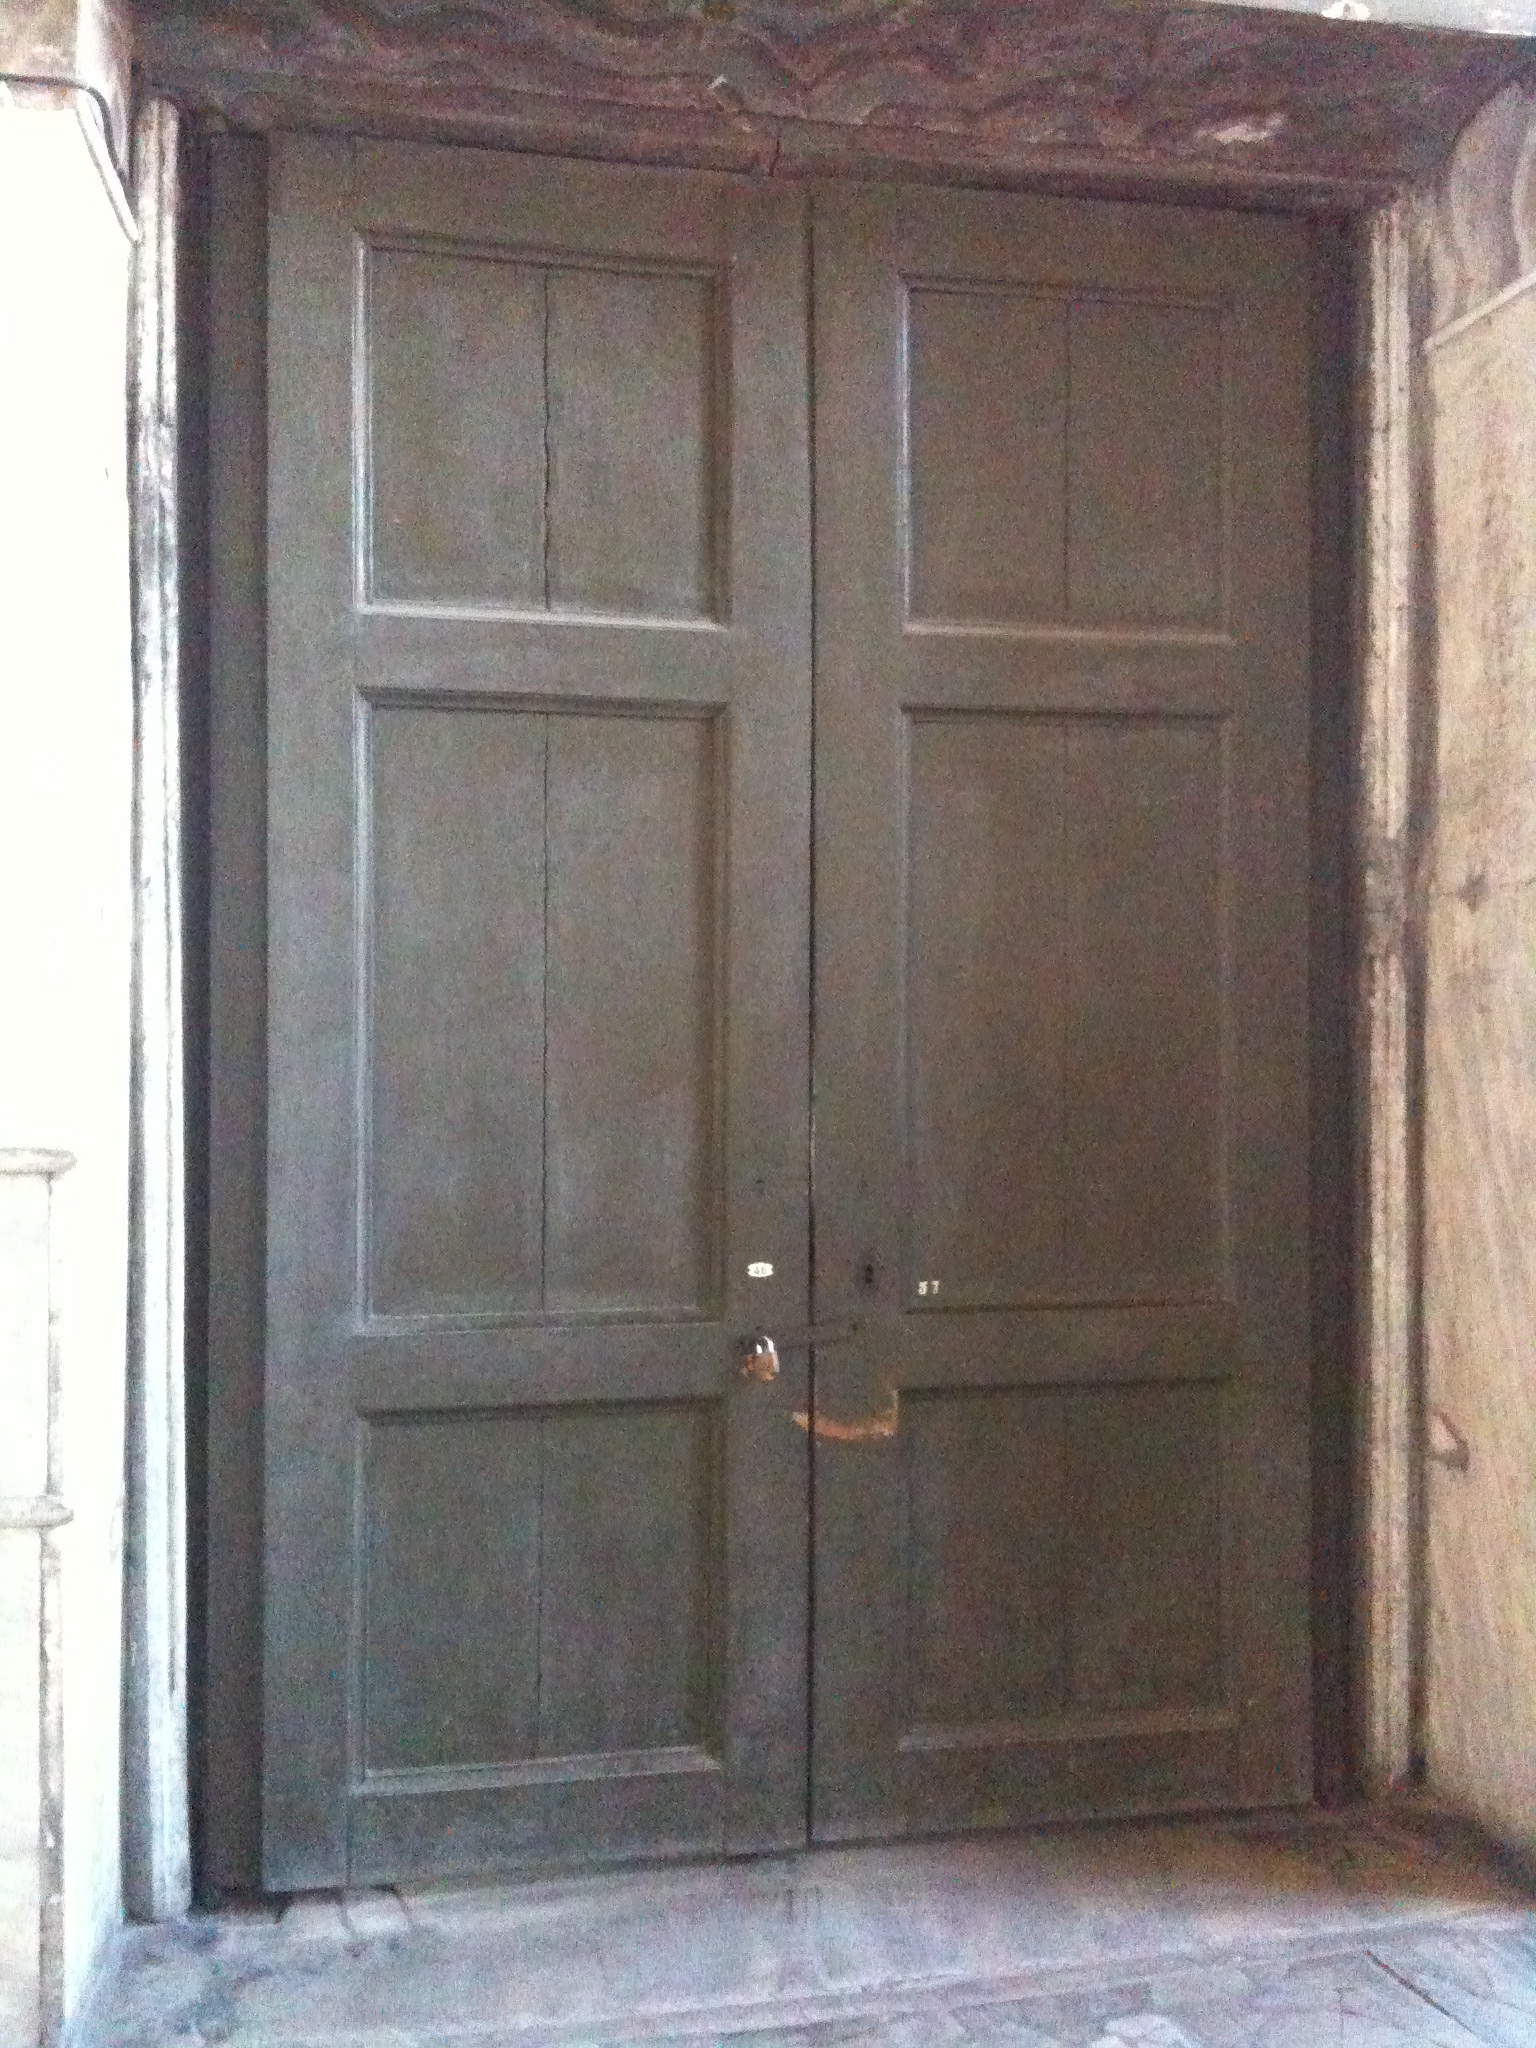 Door to the Ecumenical Patriarch's office at Hagia Sophia in Istanbul, Turkey